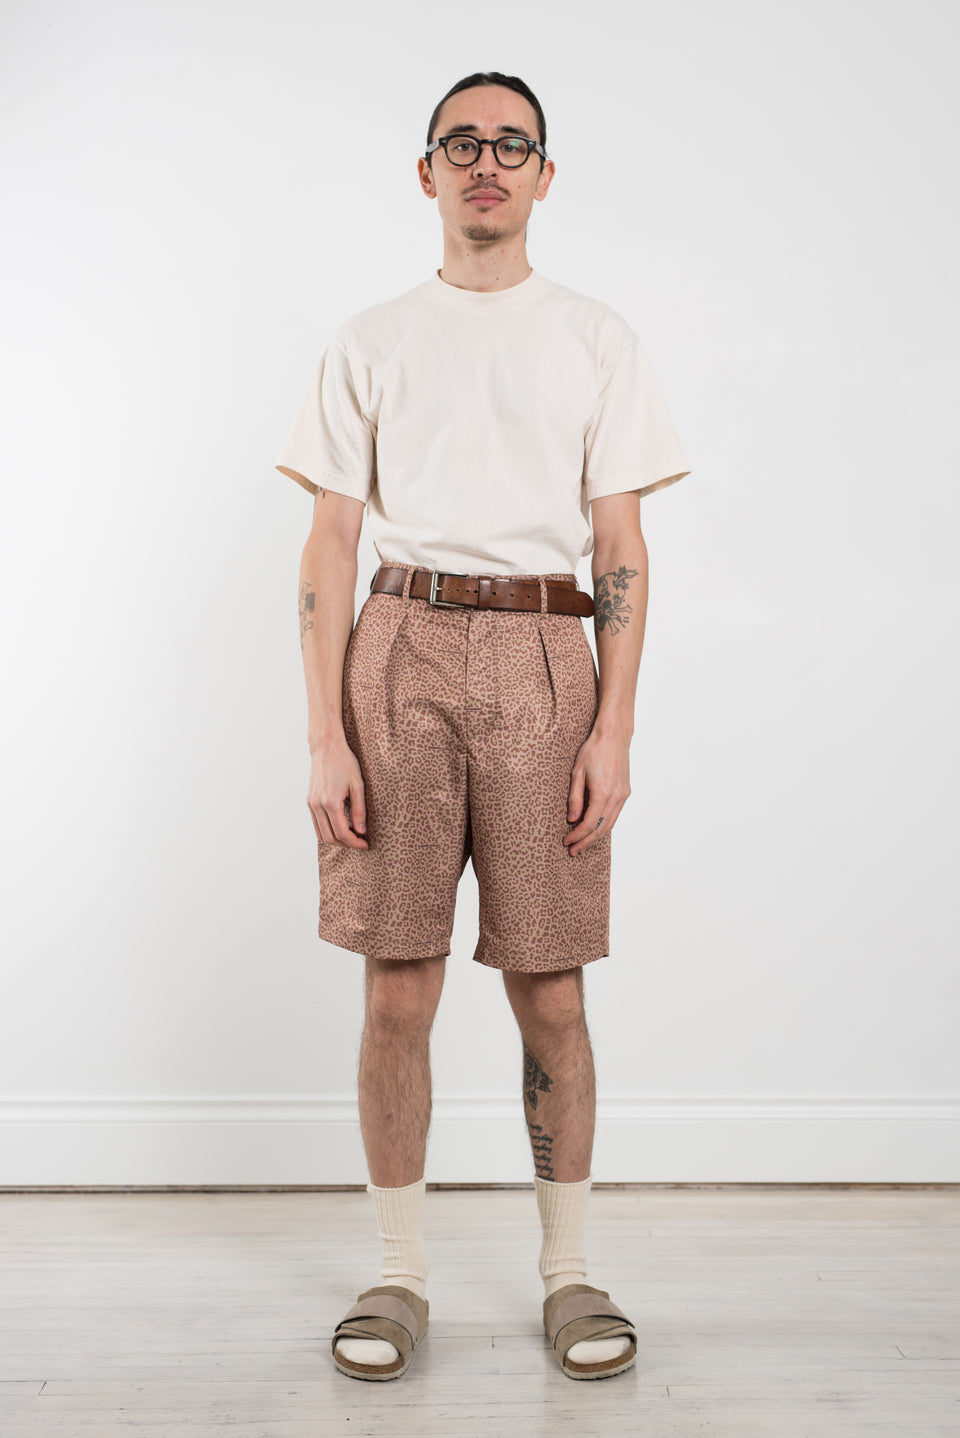 Engineered Garments SS22 Nepenthes New York Sunset Short Brown Poly Fiber Leopard Print Calculus Victoria BC Canada